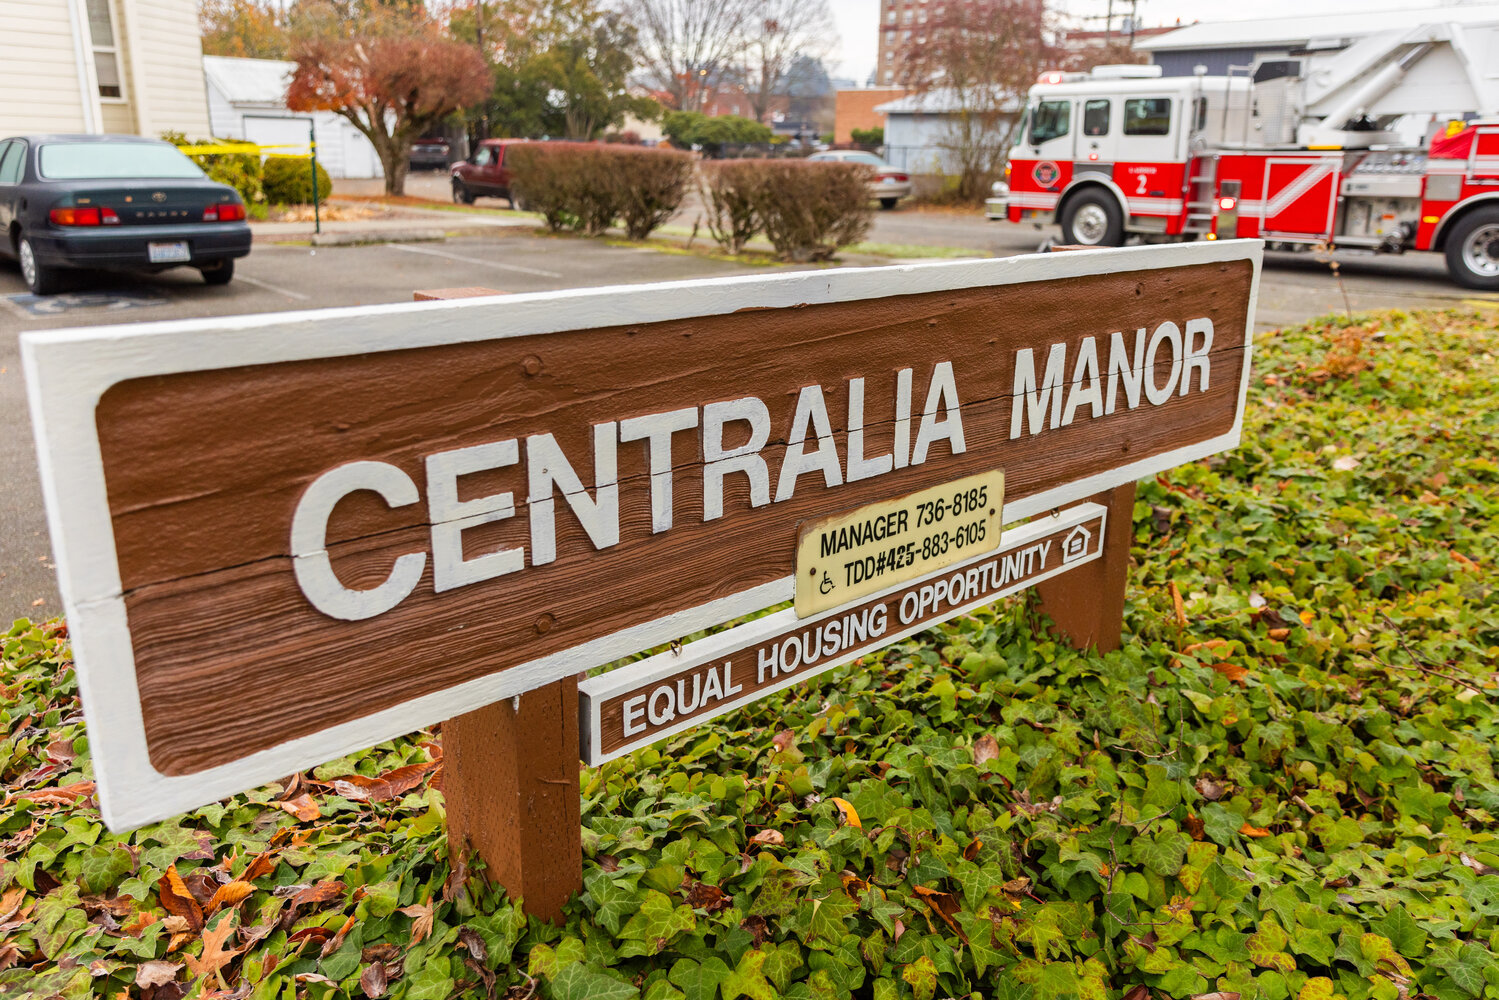 The Centralia Manor Apartments were evacuated following a fire on Wednesday, Nov. 29.